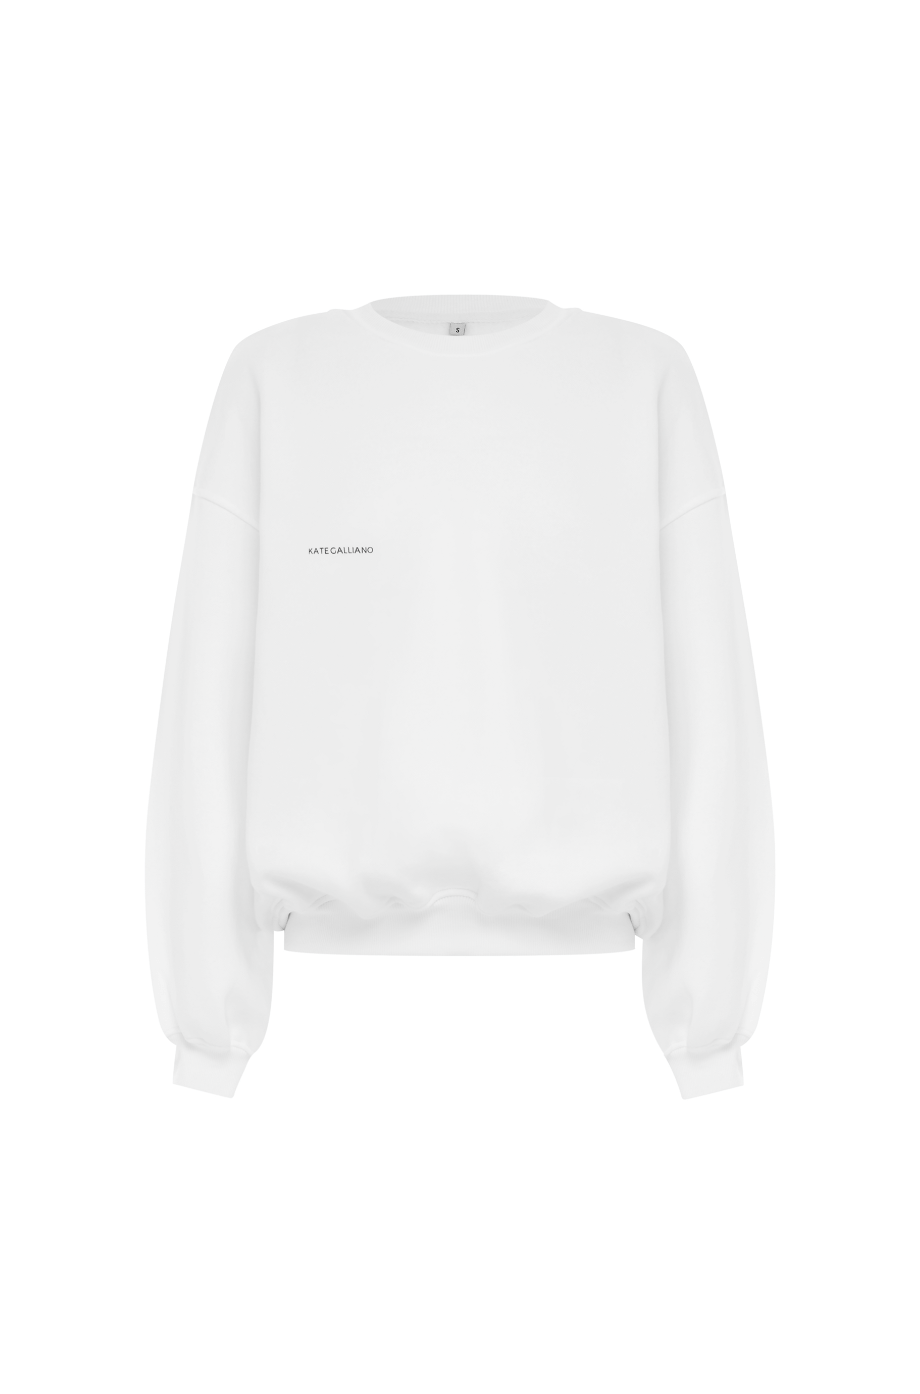 LUXE 23 Jumper - White | Be Activewear